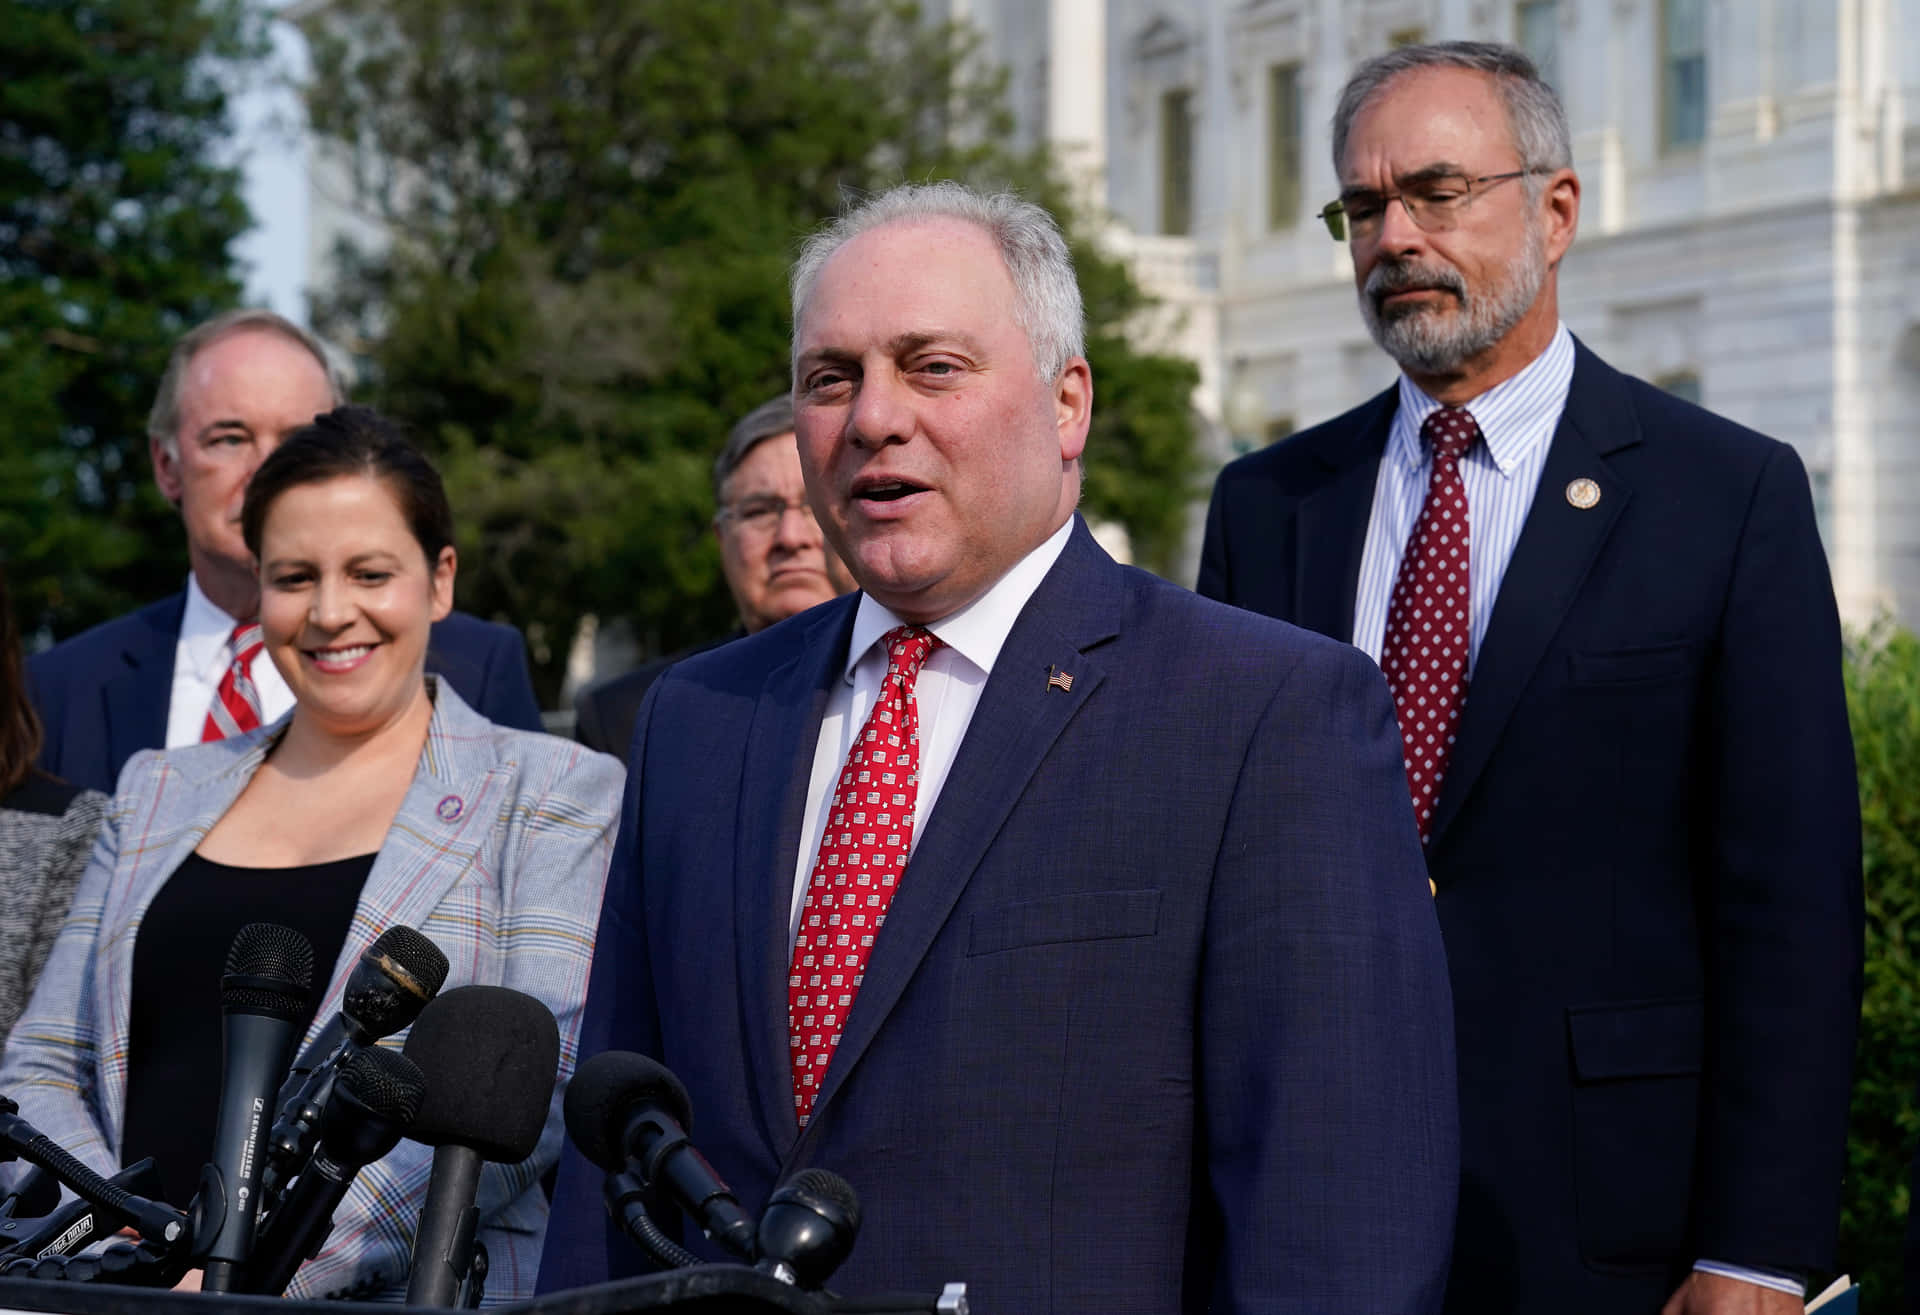 Steve Scalise With Other Congresspersons Background